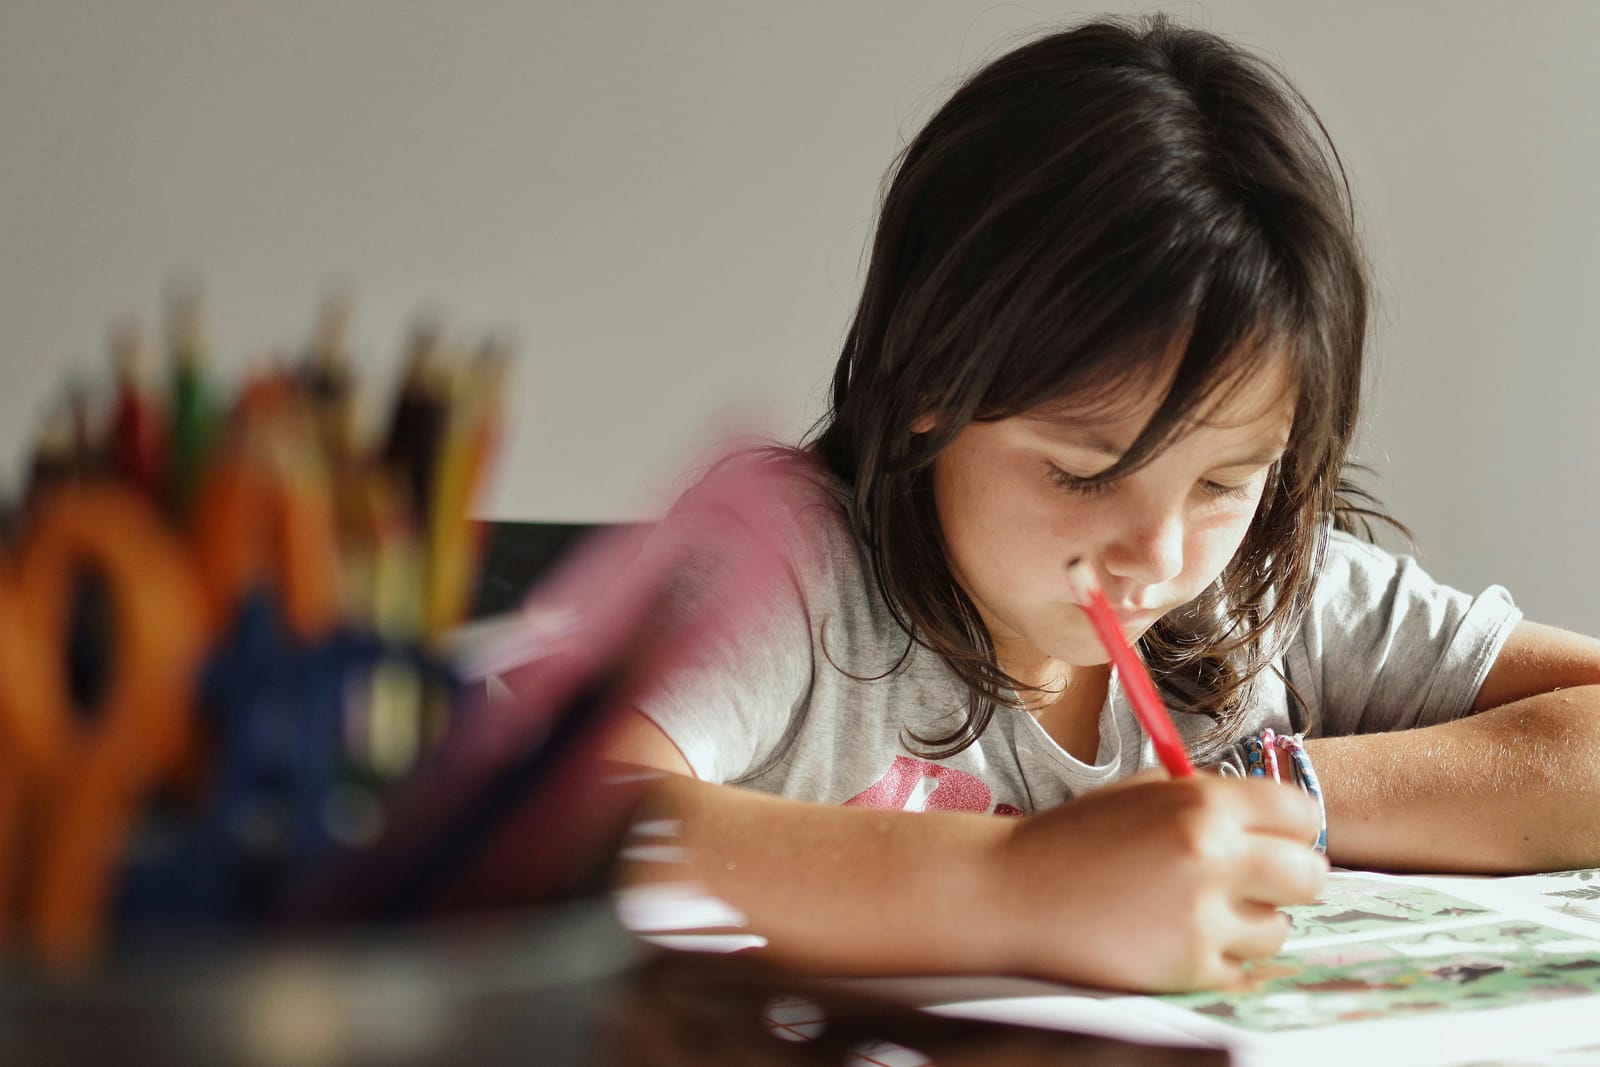 Photograph of a child with writing equipment in foreground, drawing on a worksheet with a pencil